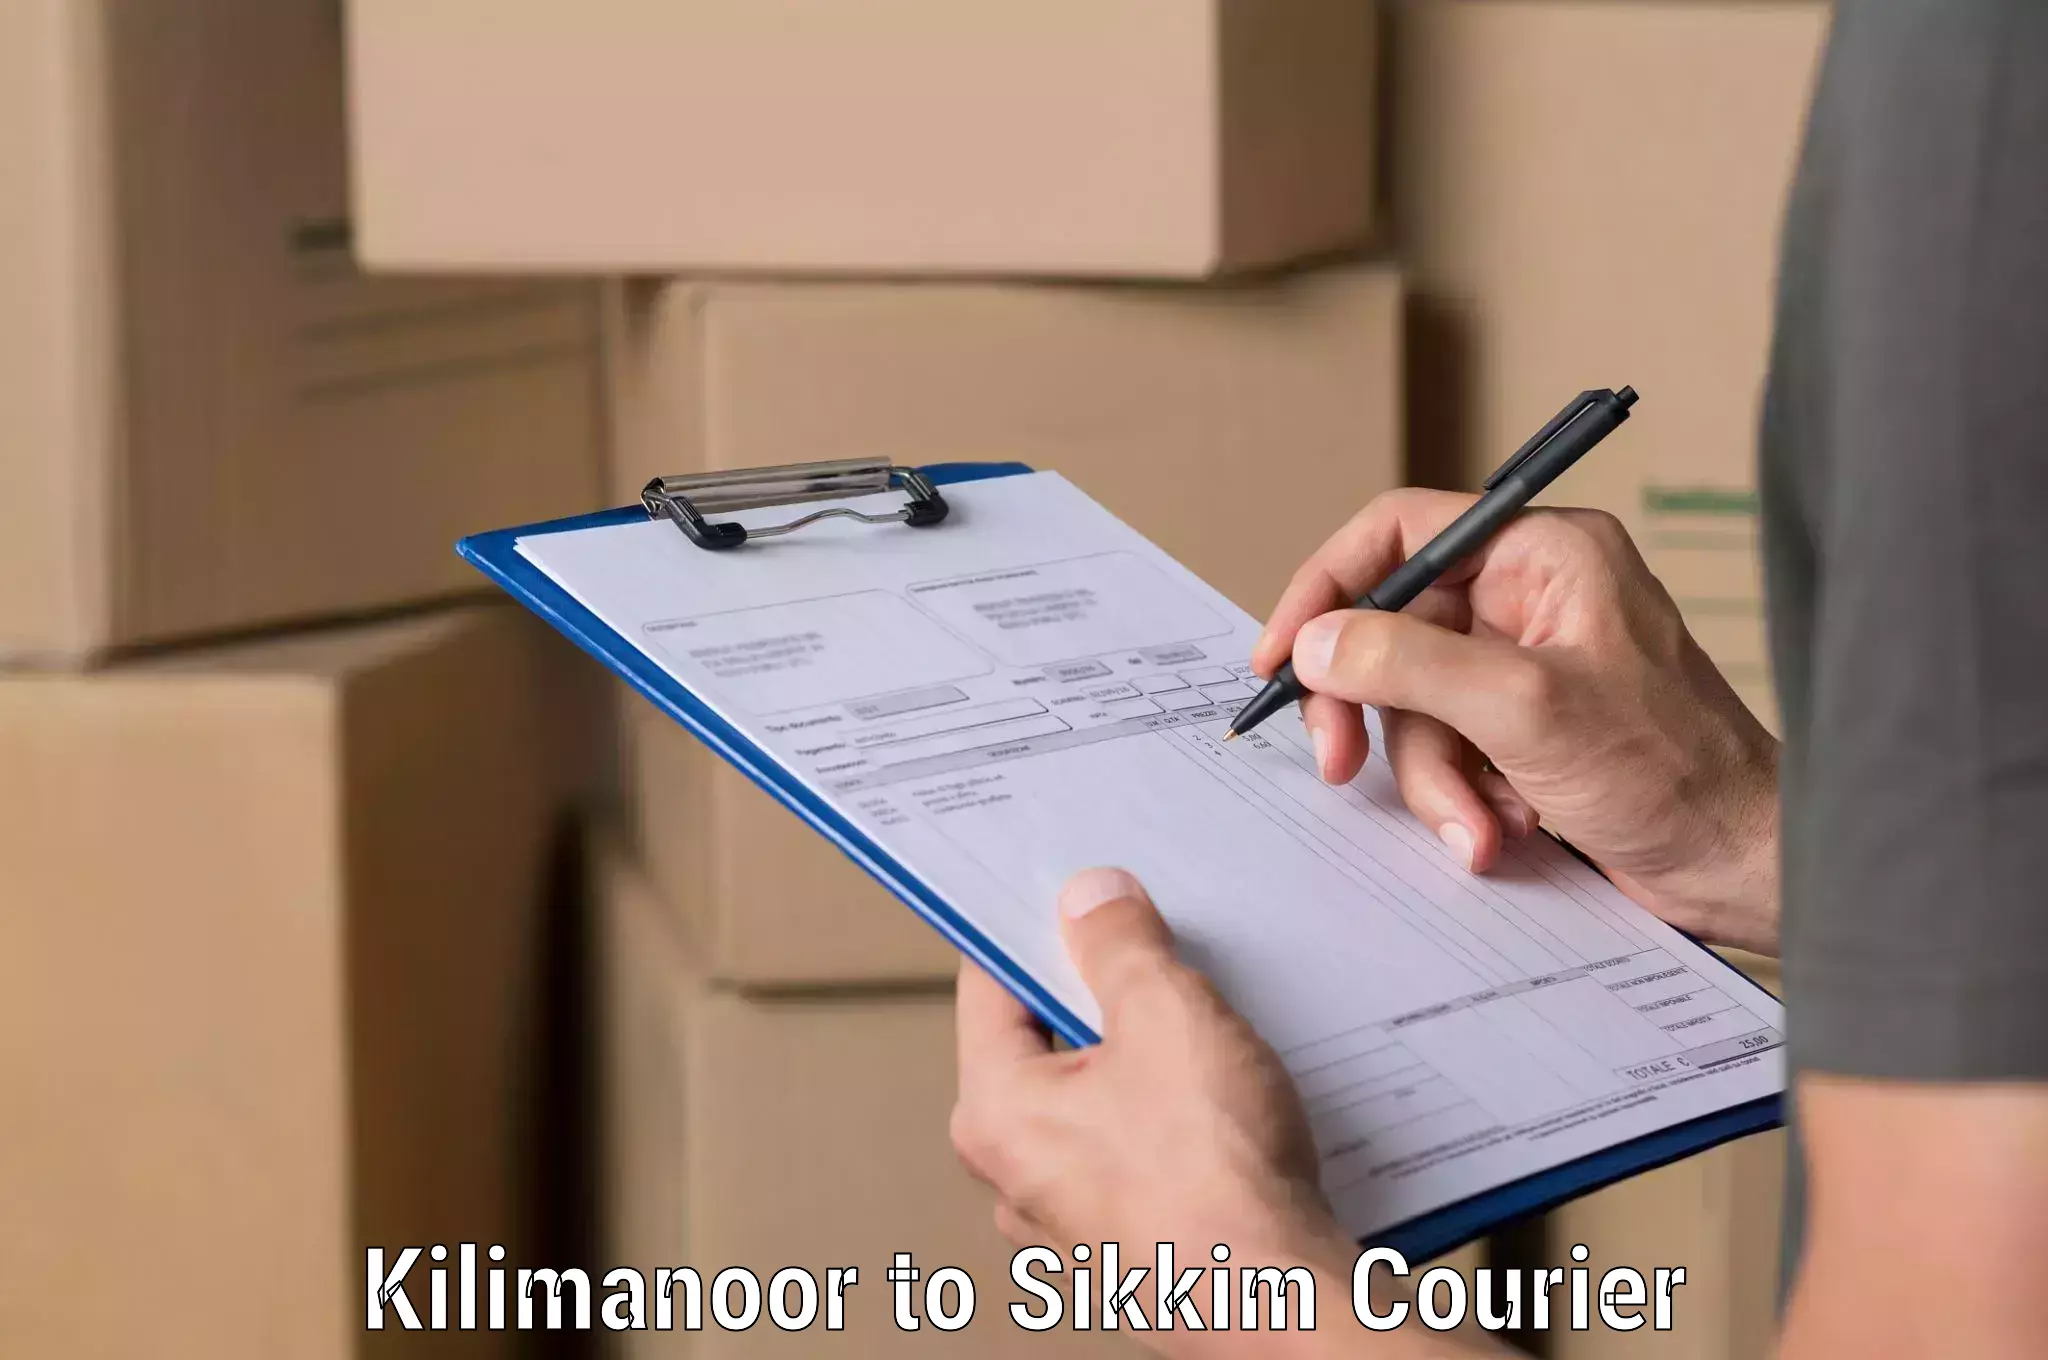 Cash on delivery service Kilimanoor to Sikkim